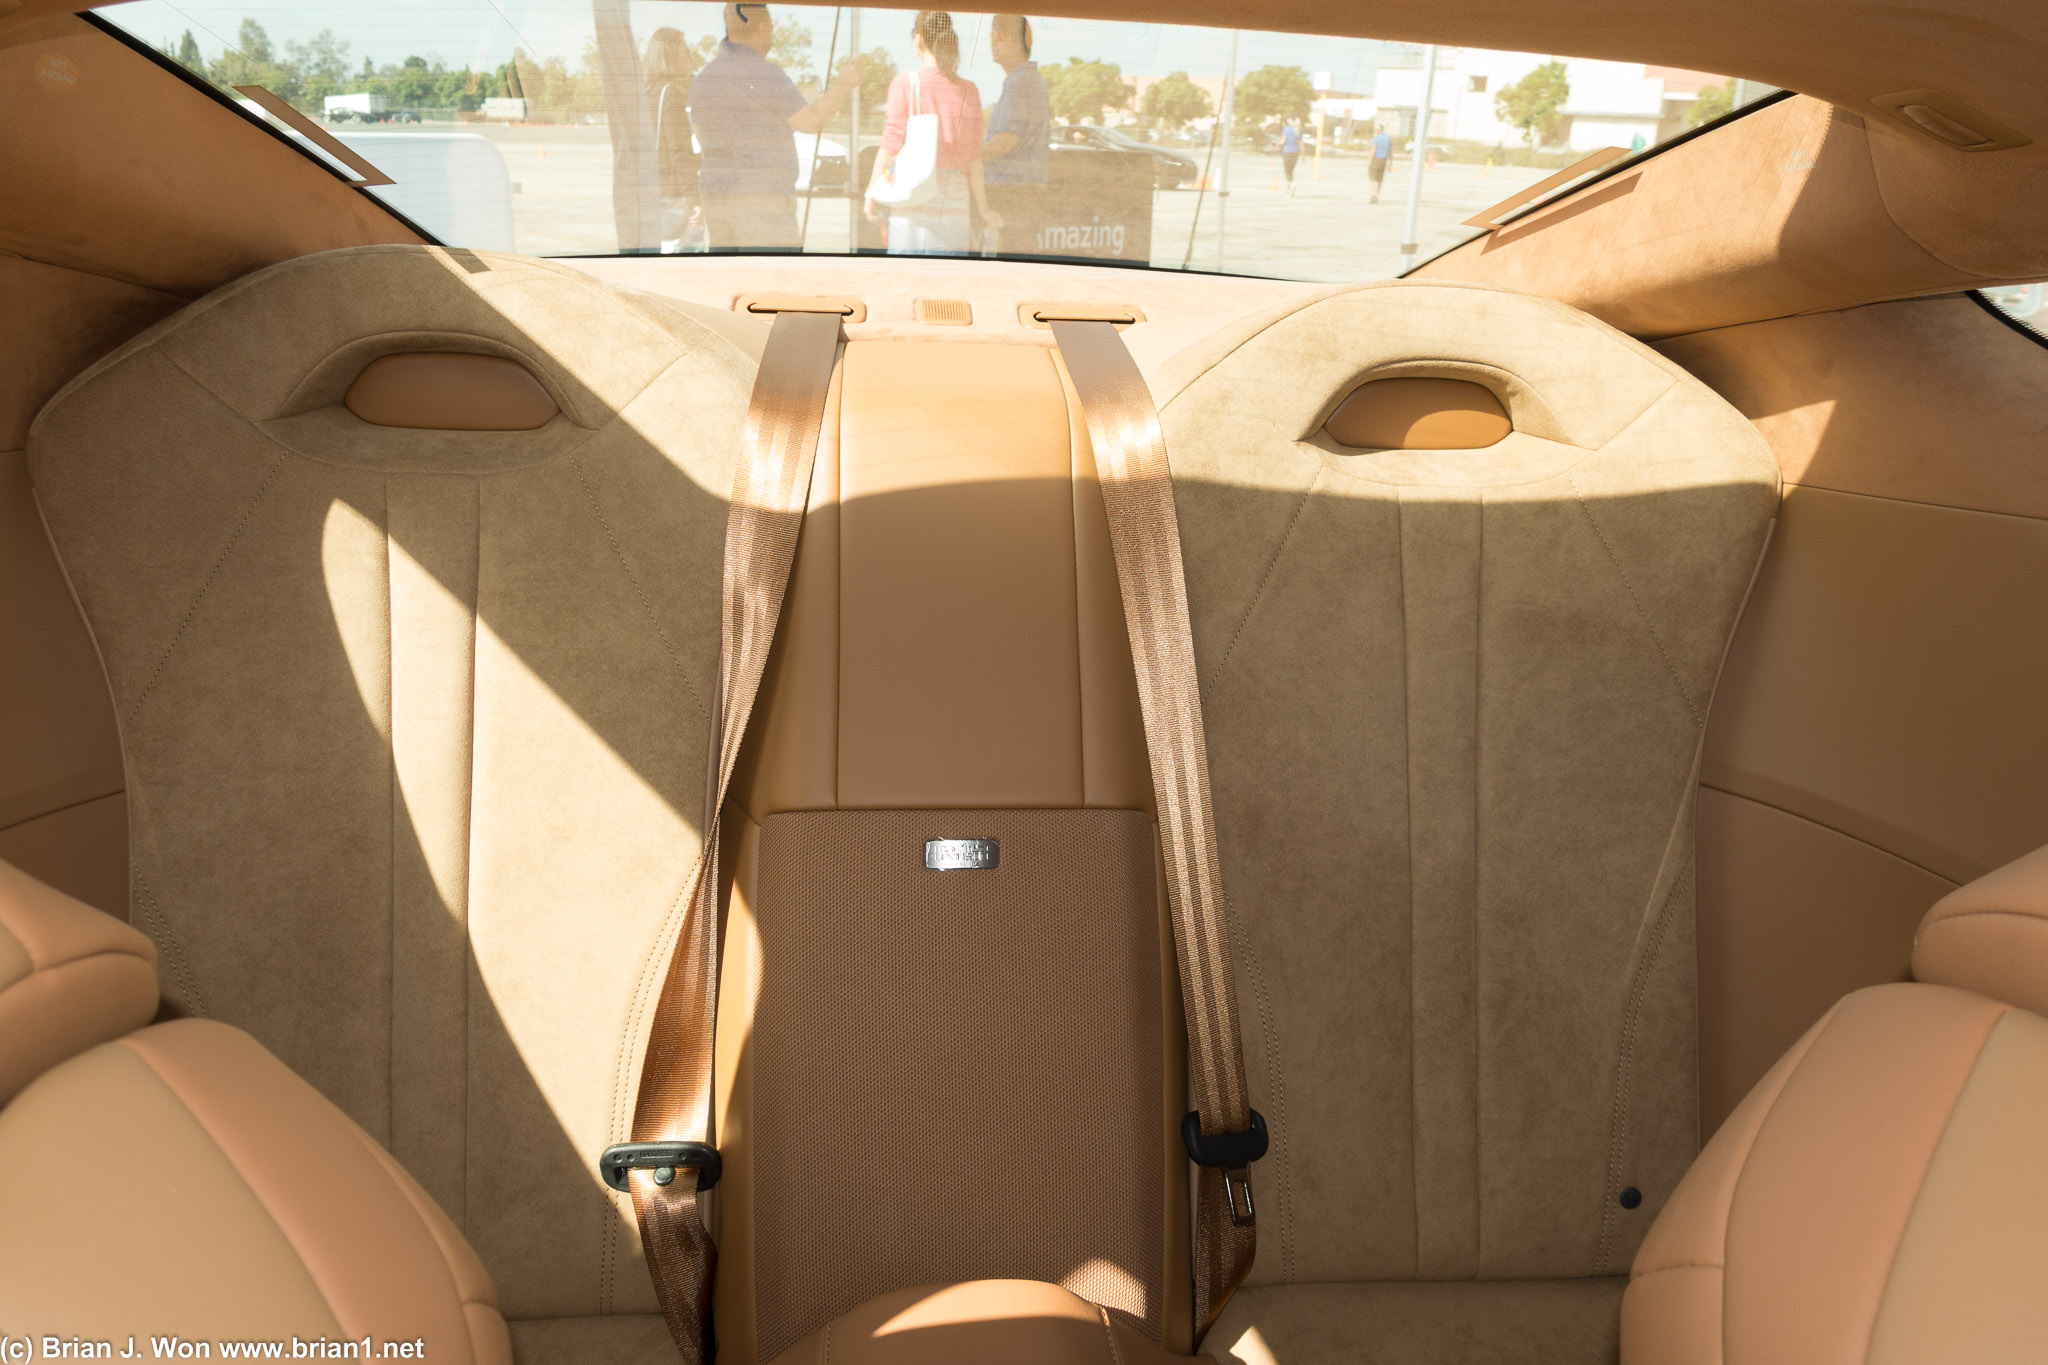 Lexus LC500 backseat. It's essentially a shelf with seatbelts.